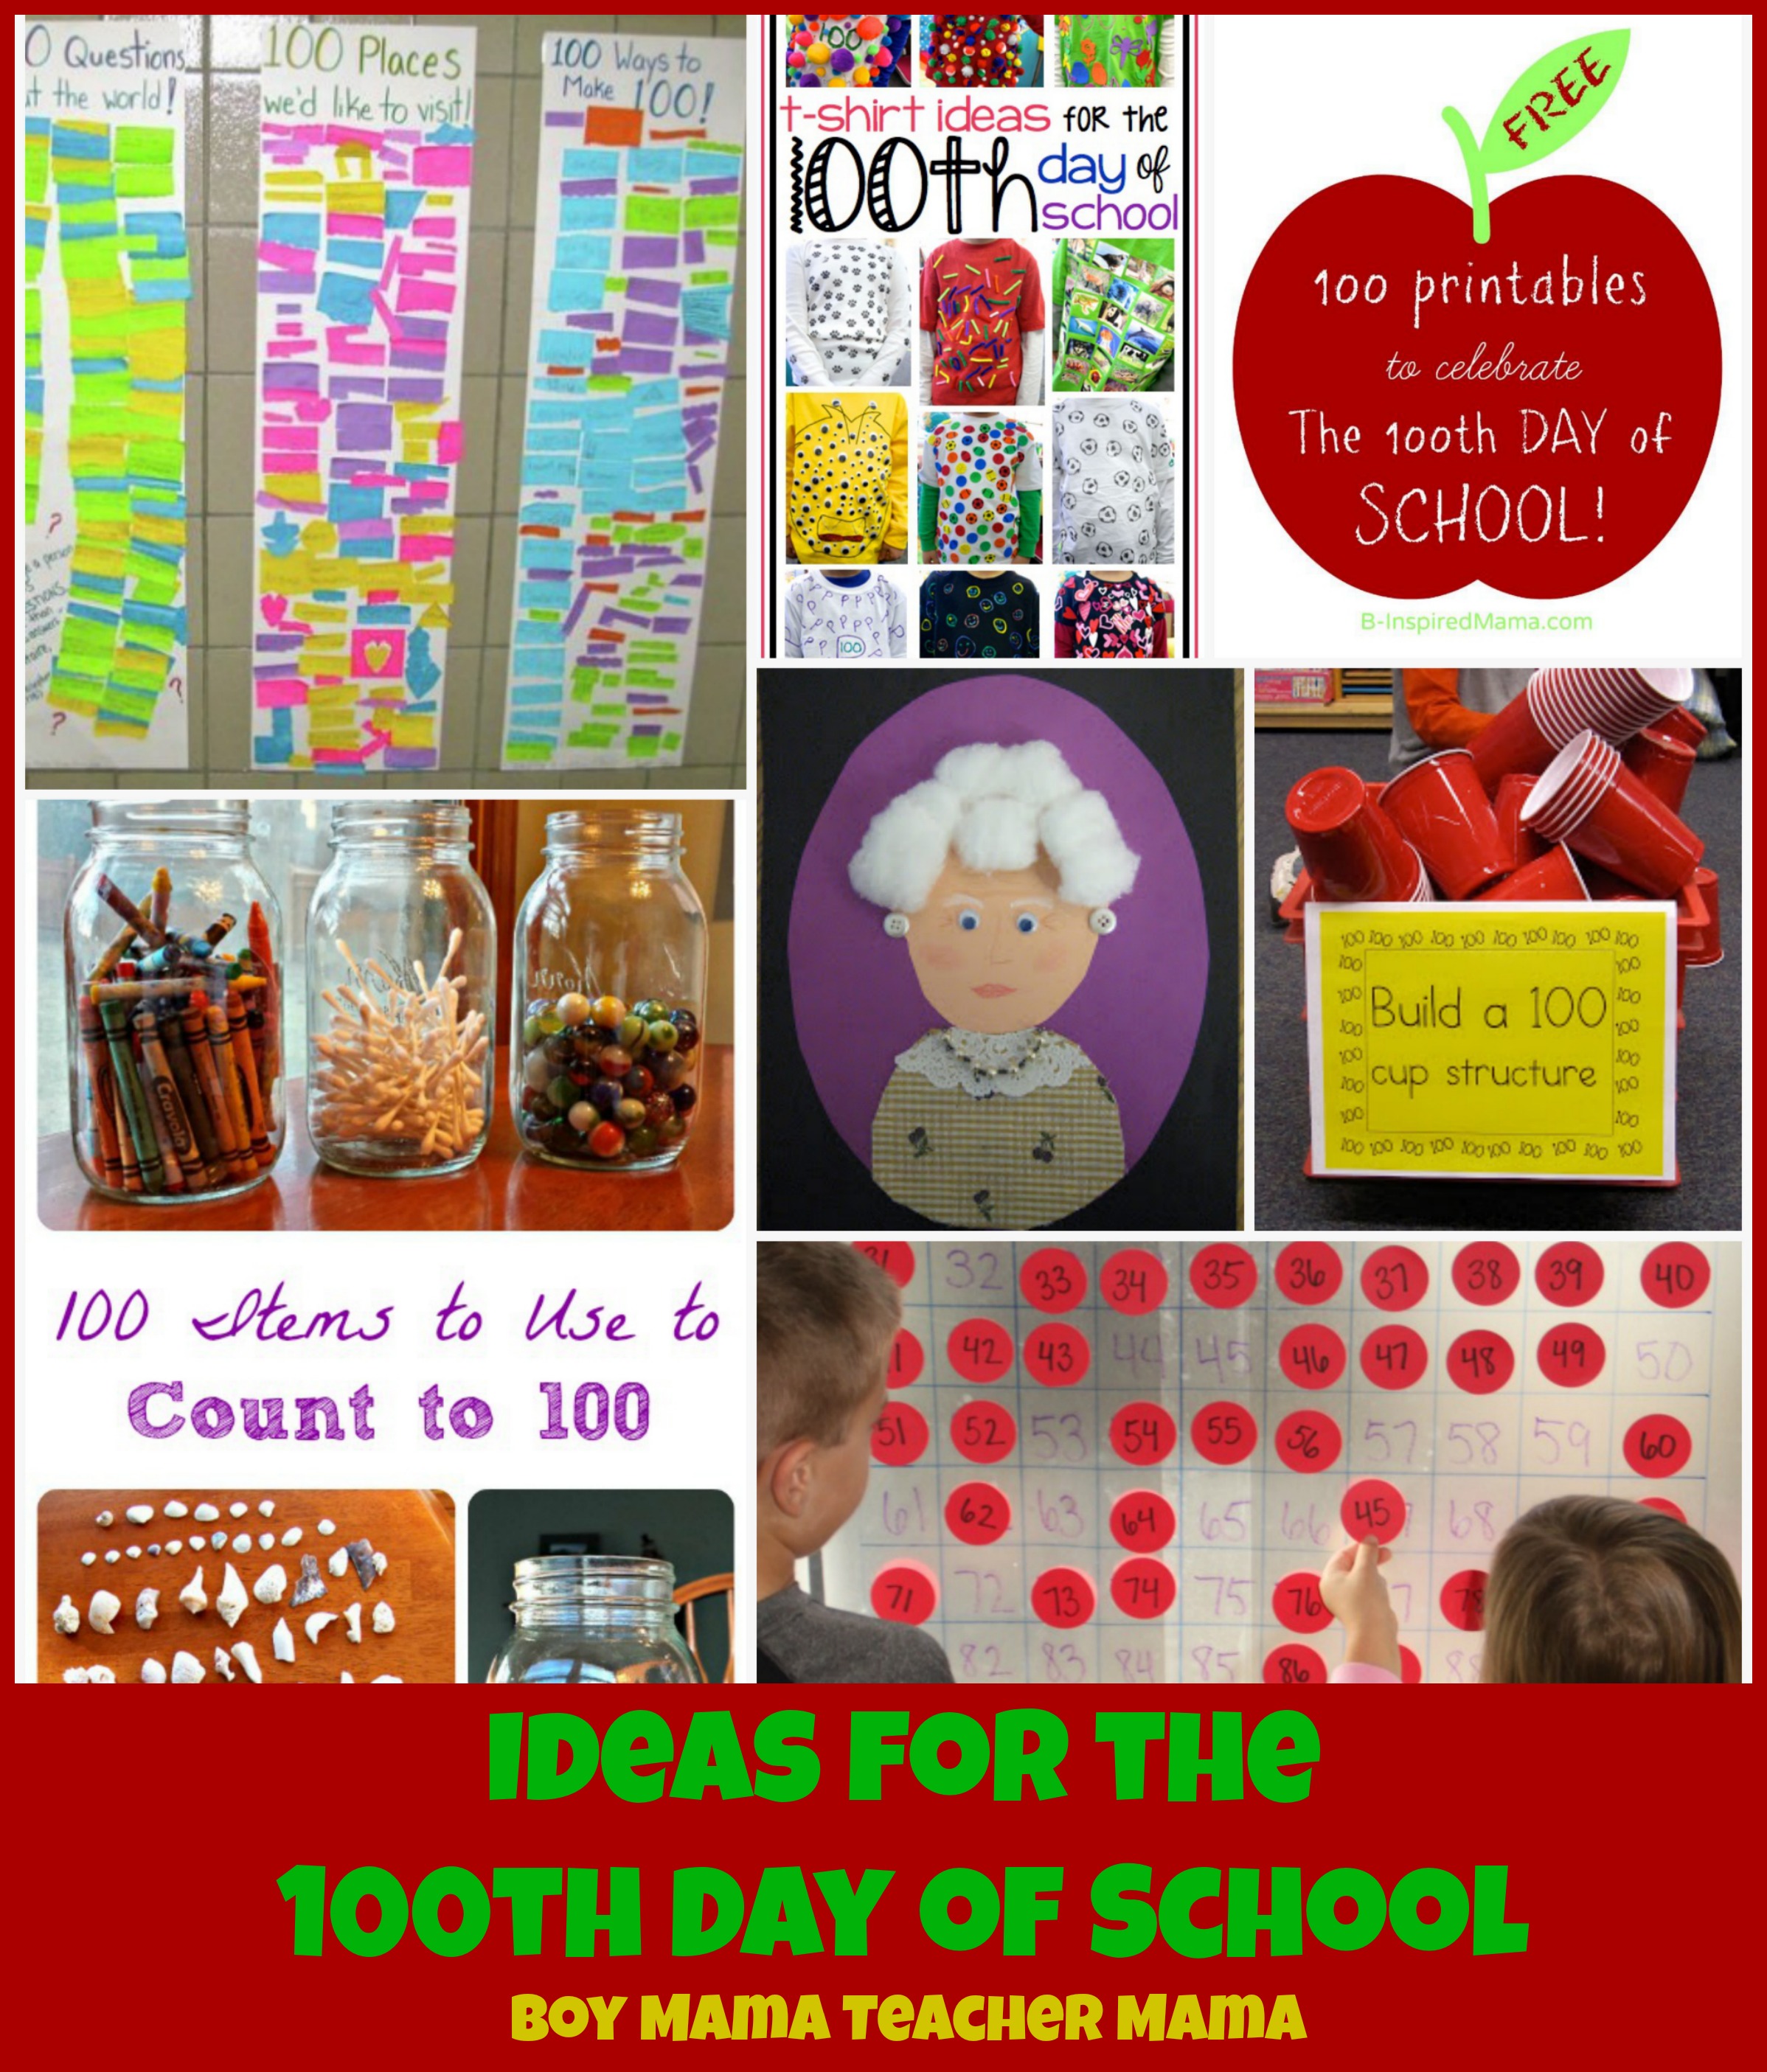 teacher-mama-great-ideas-for-100th-day-of-school-after-school-linky